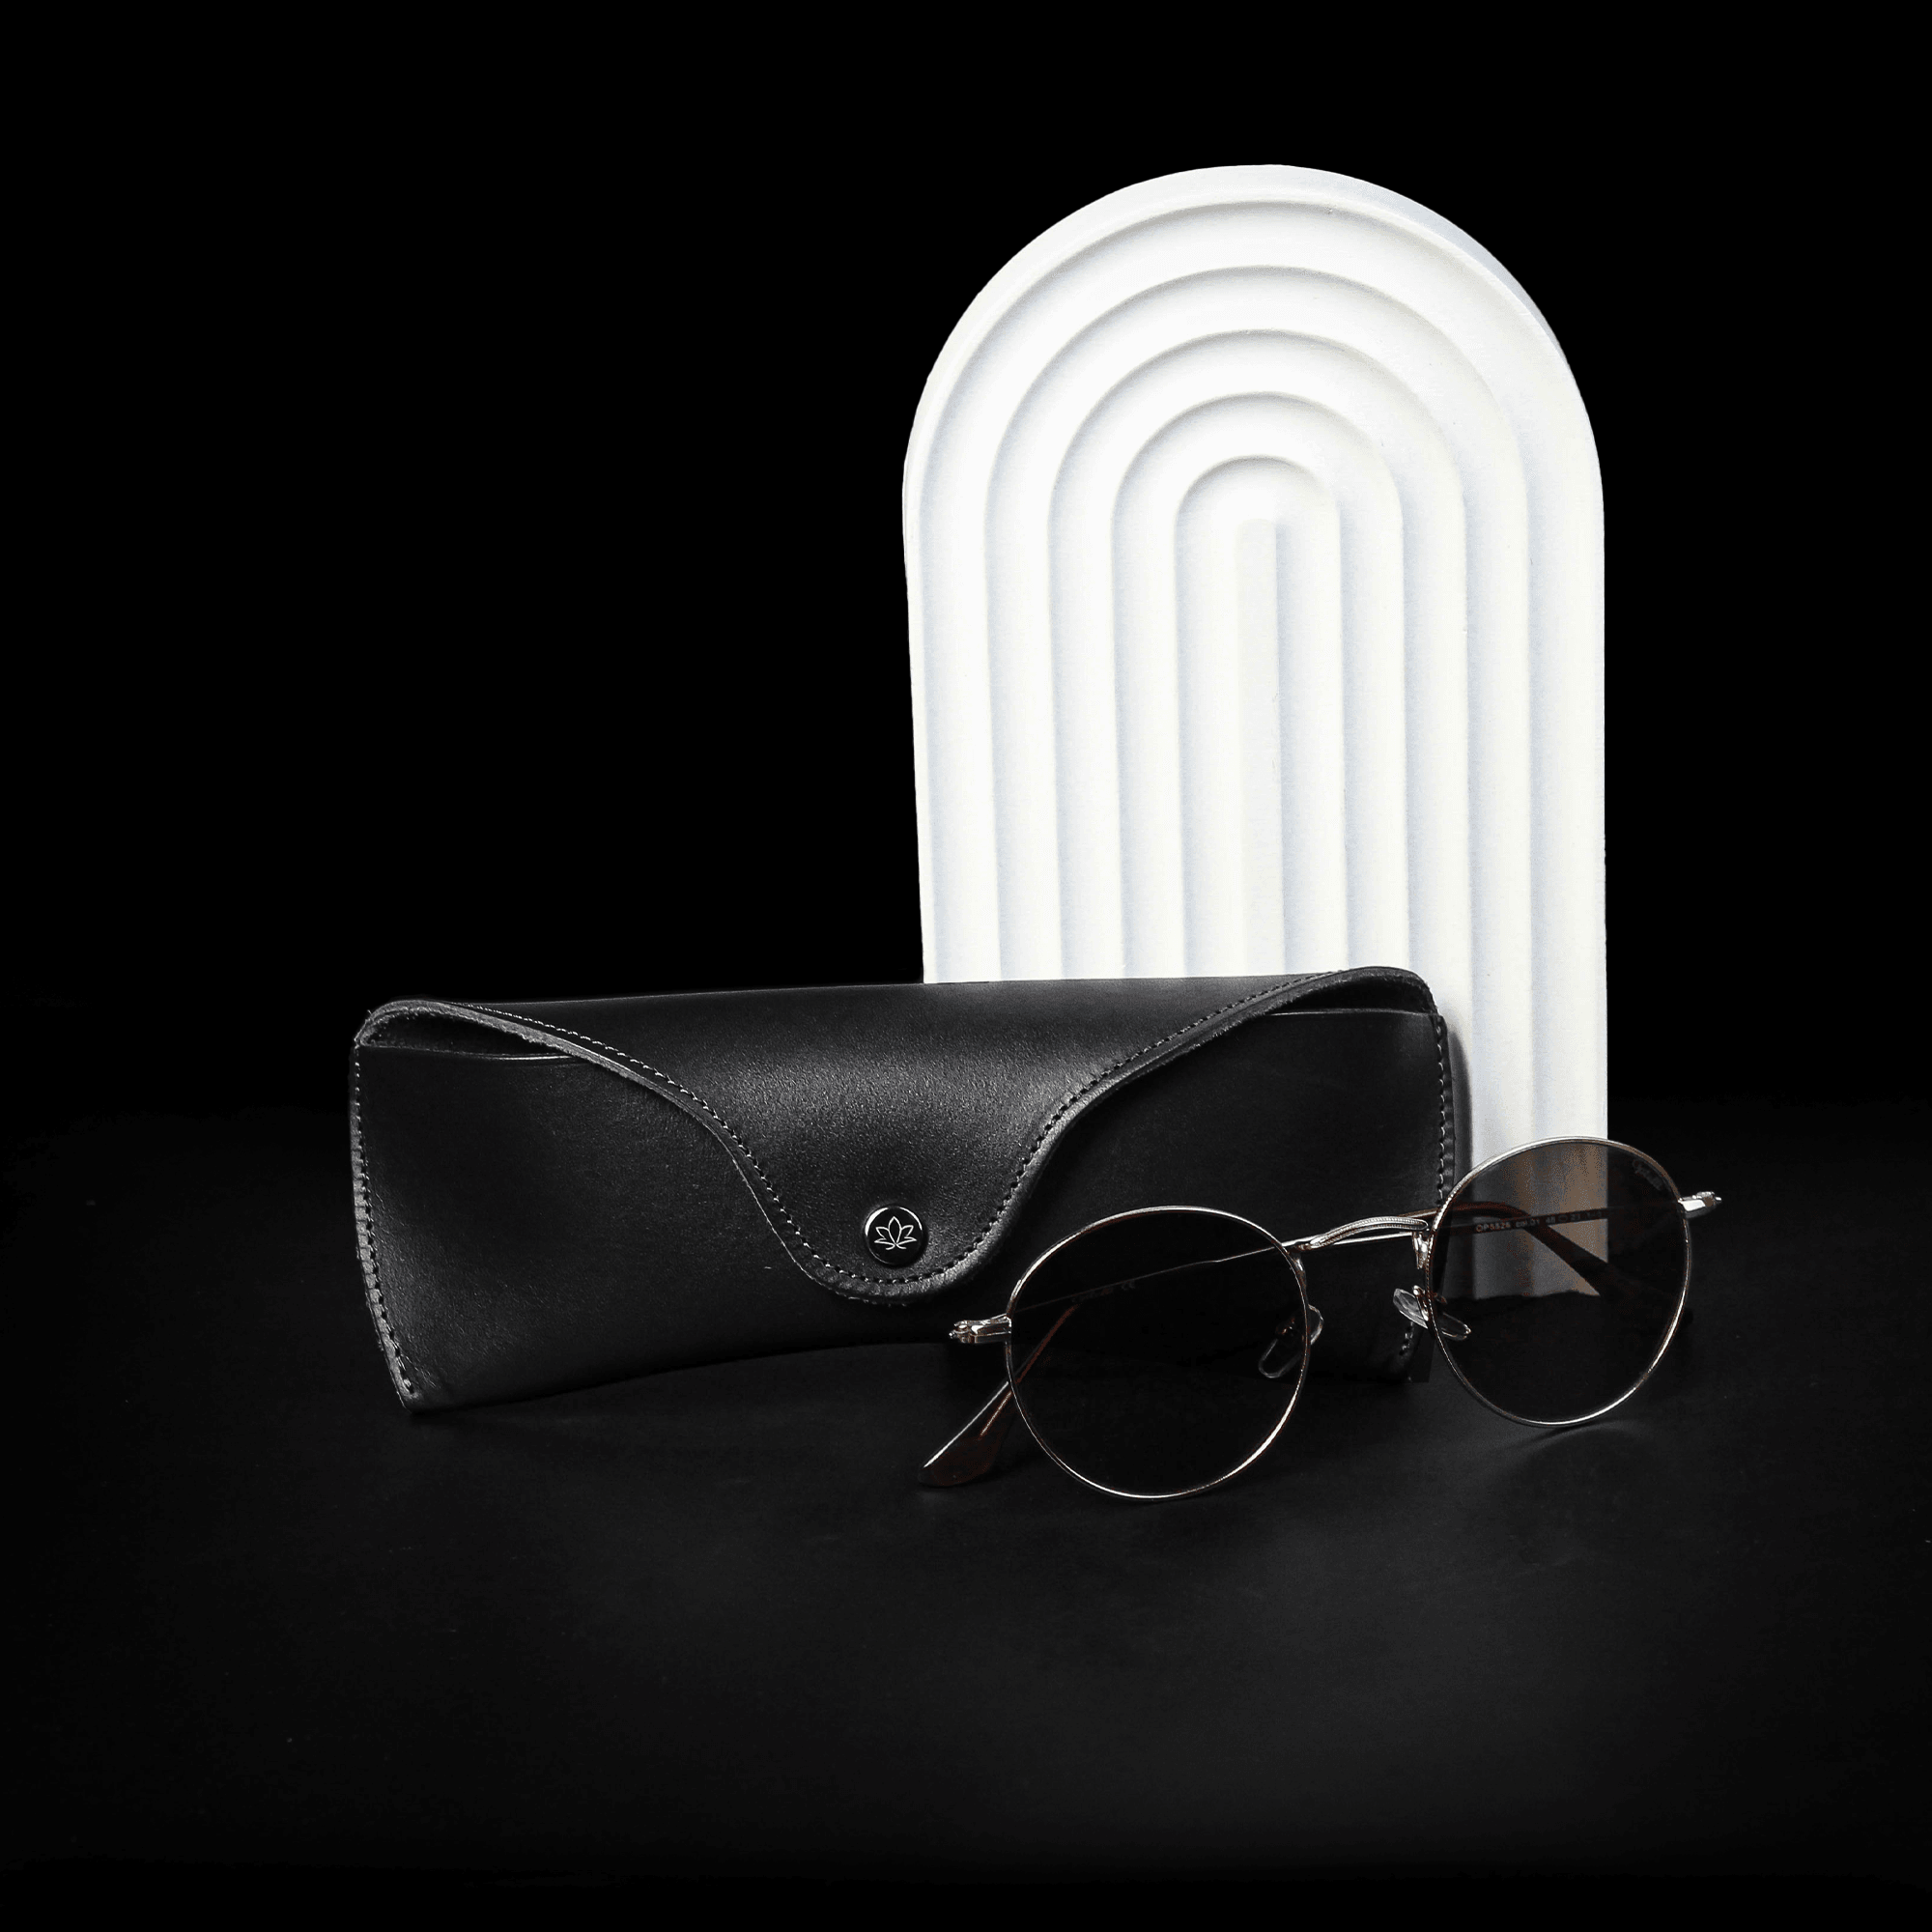 Chanel glasses case with chain